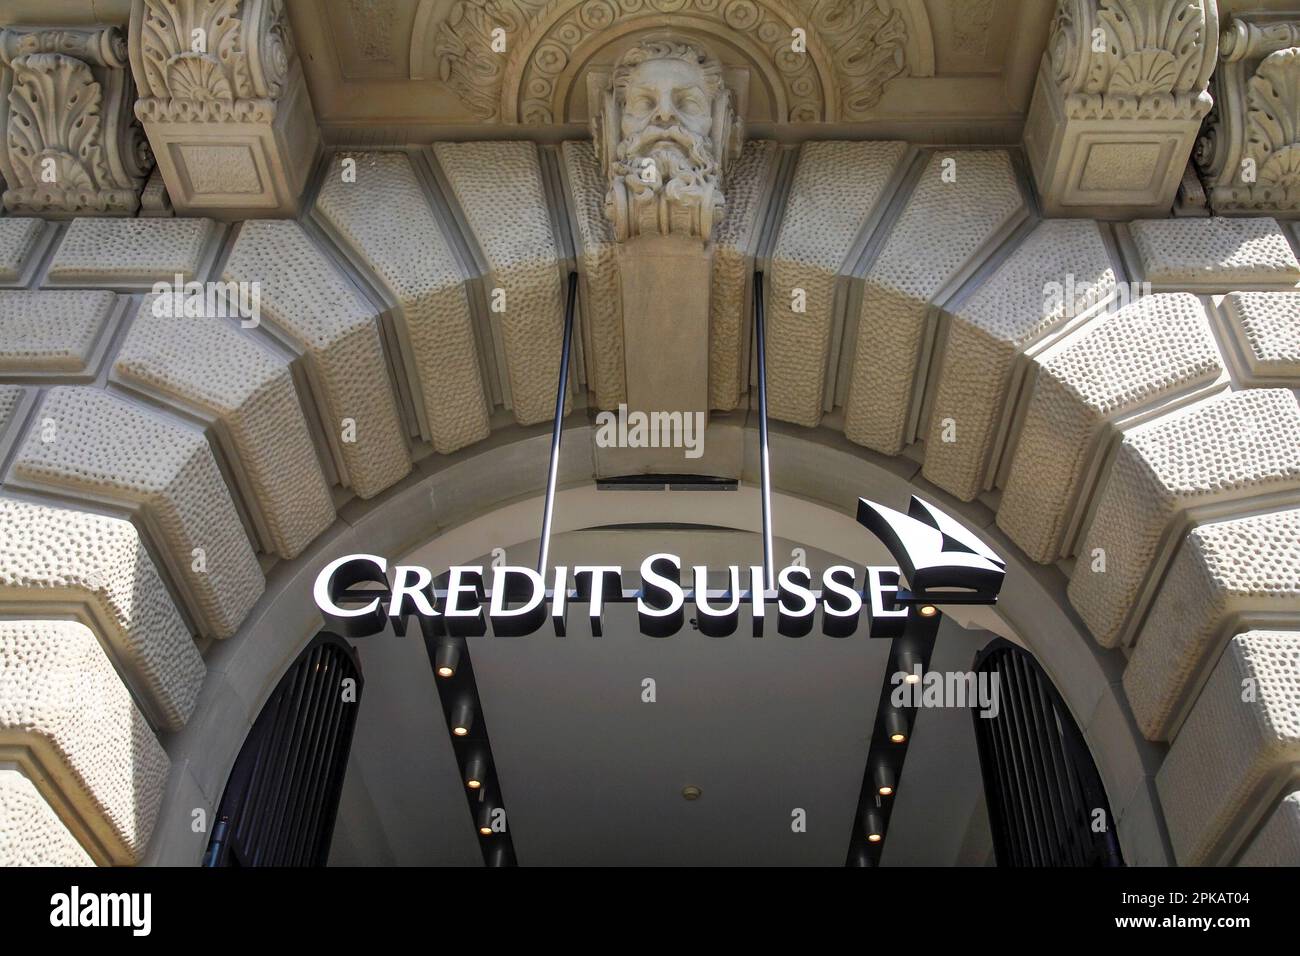 Zurich, Switzerland - Credit Suisse, company logo on the facade of the Credit Suisse Bank headquarters on Paradeplatz in the City district of Zurich, here on the occasion of the takeover by UBS Bank. Archive photo from 20.05.2007 Stock Photo